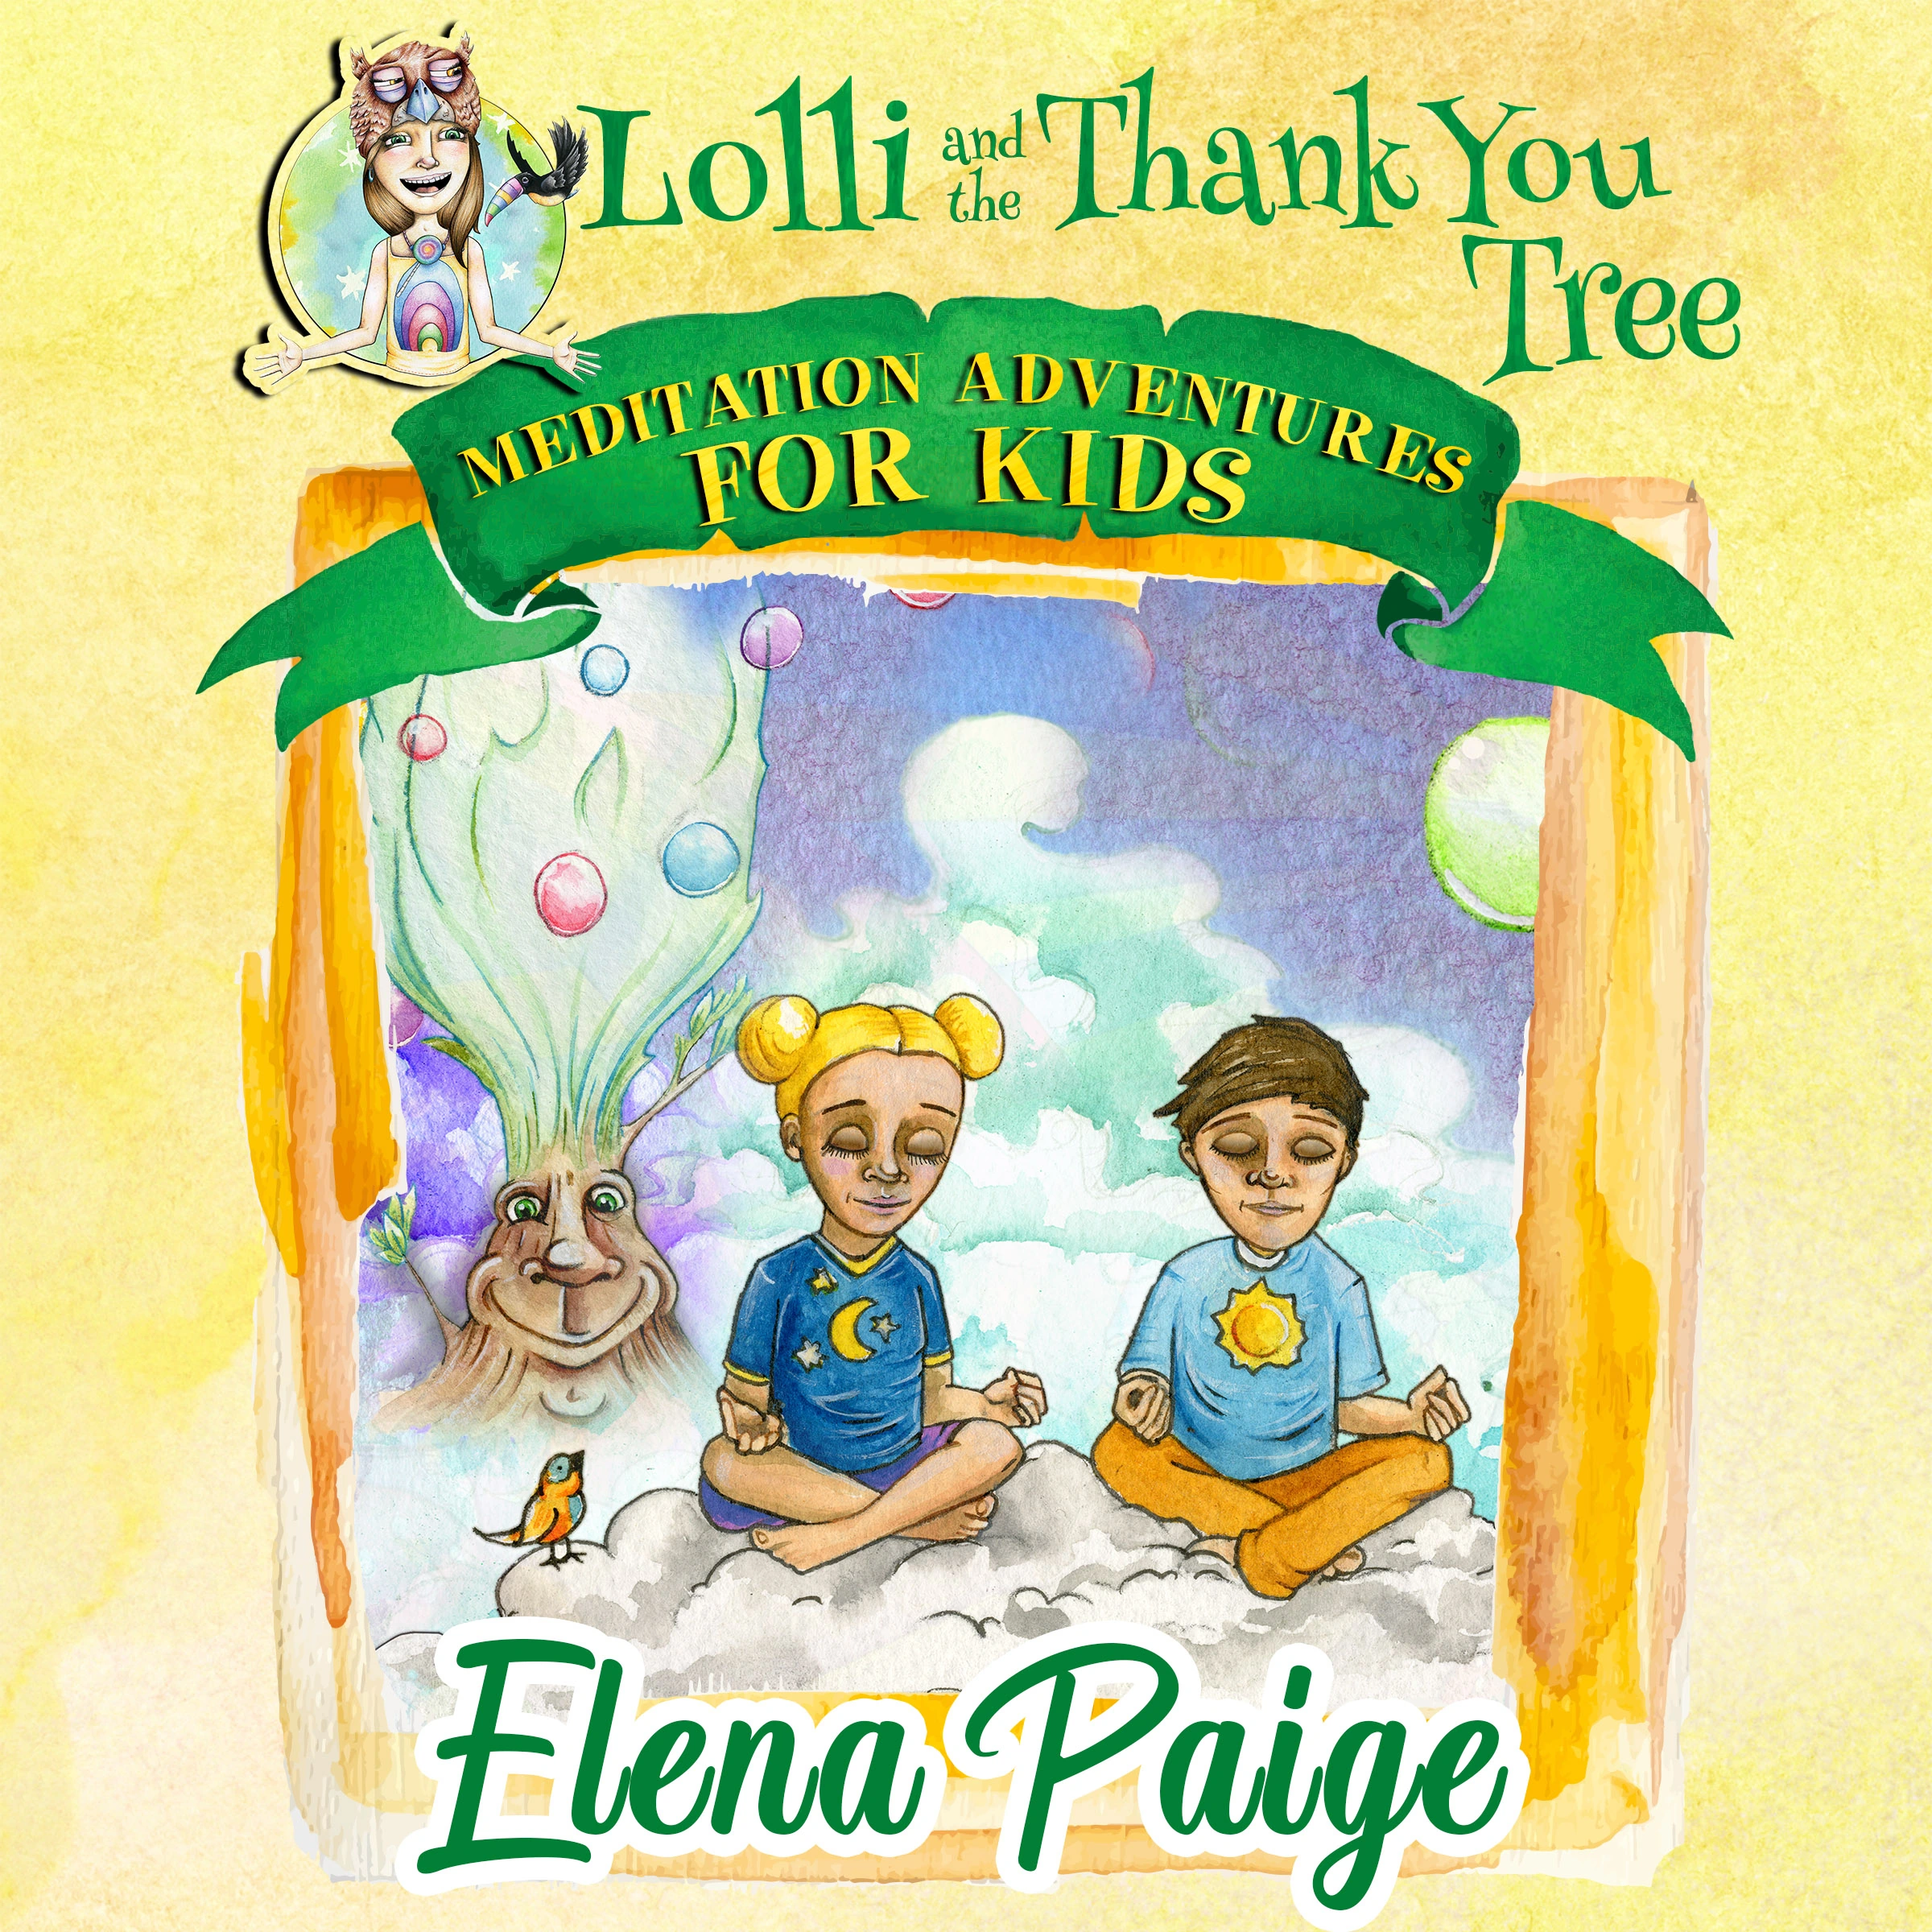 Lolli & the Thank You Tree (Meditation Adventures for Kids - volume 2) Audiobook by Elena Paige